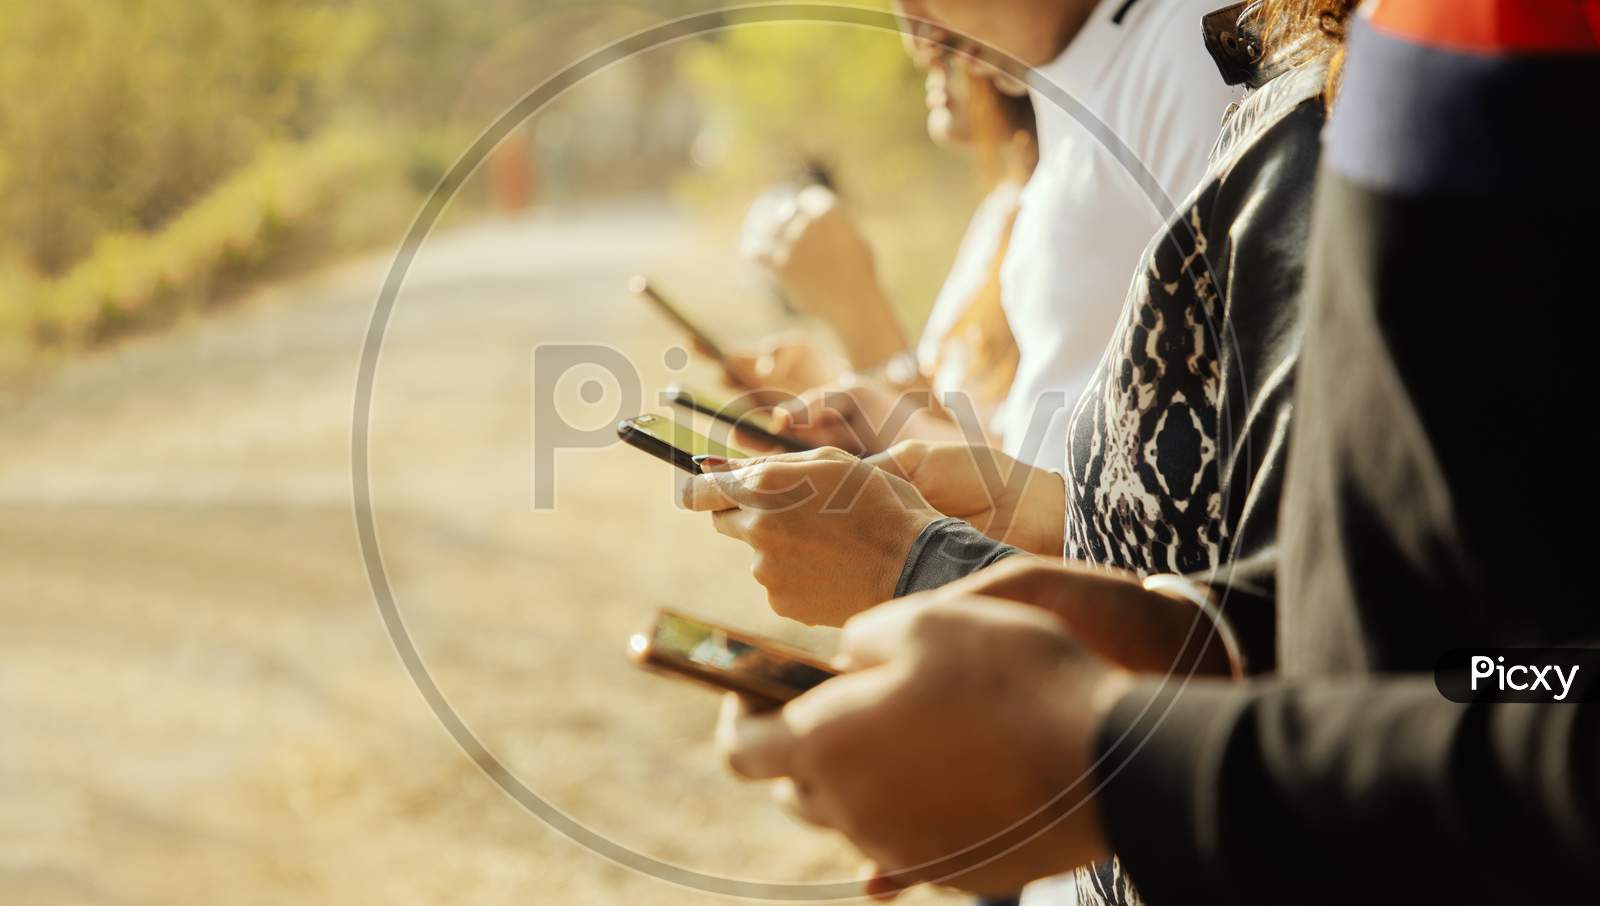 A Group of Happy Young People Using a Mobile Phone or Smartphone At Outdoors